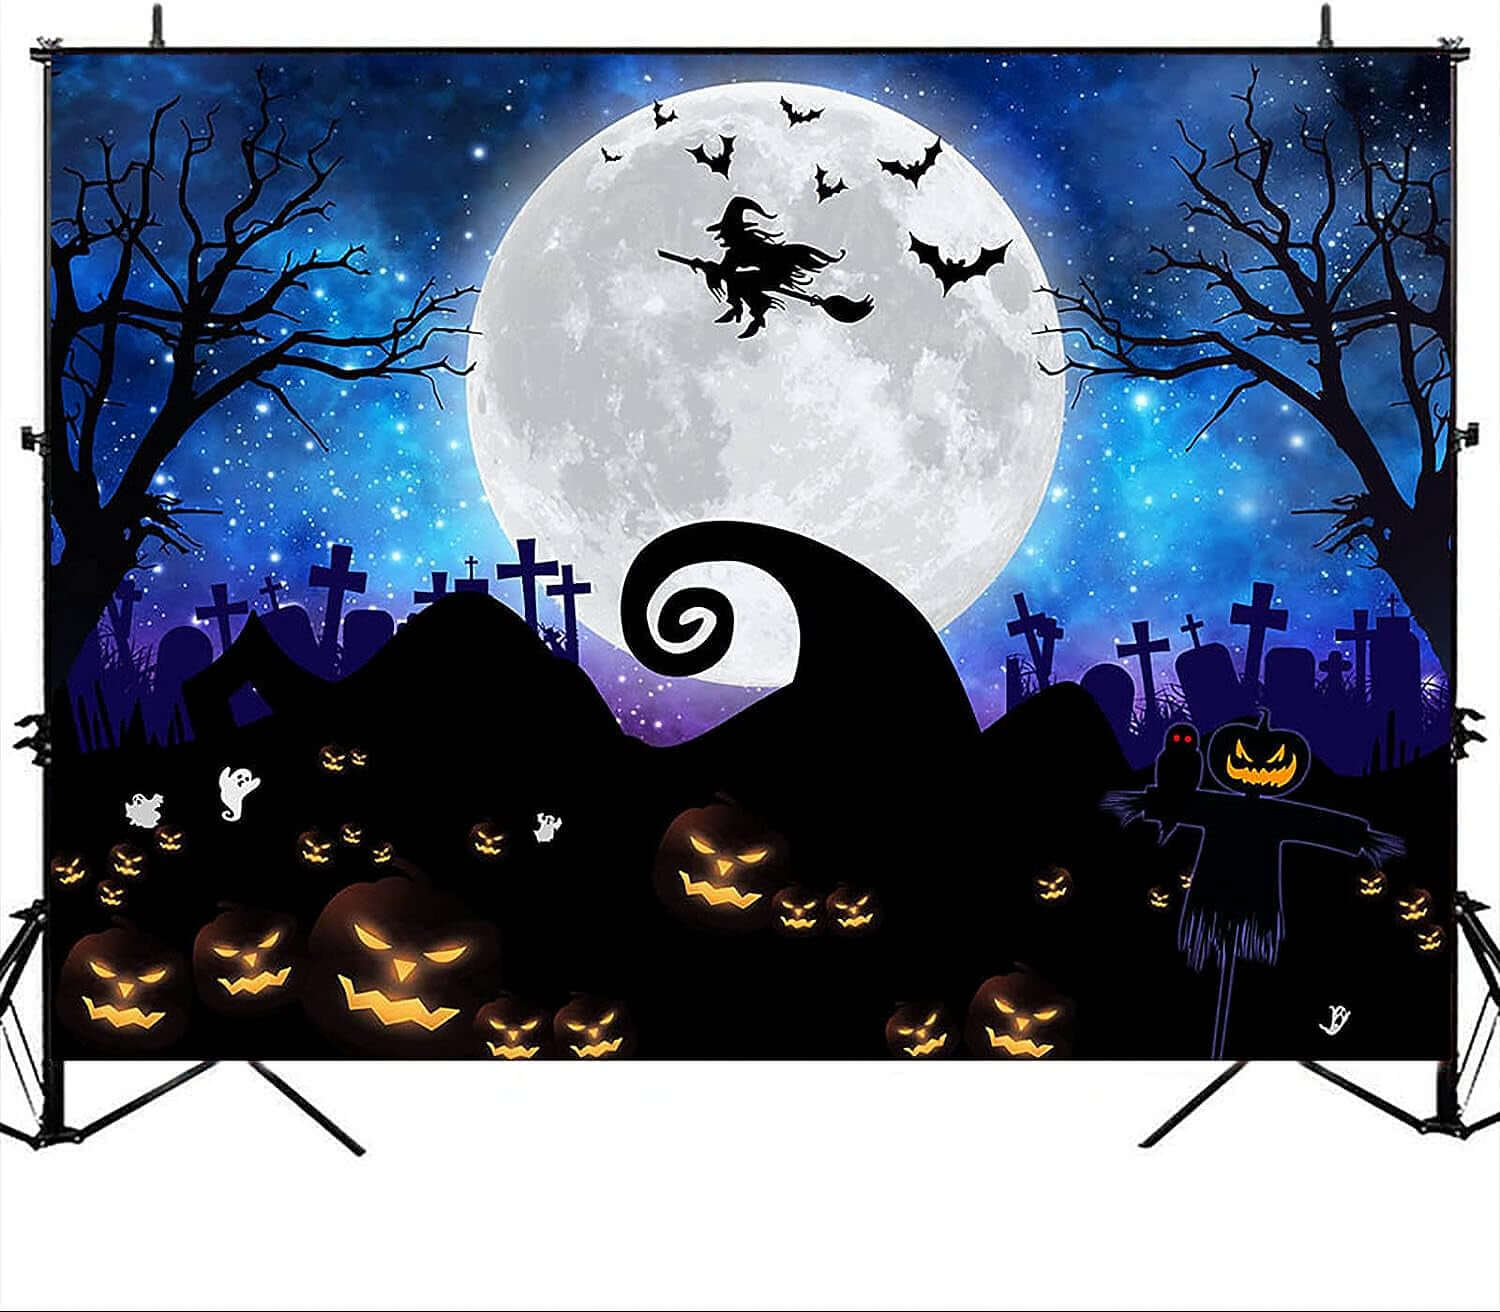 Capture Spooky Moments with our Halloween Photography Backdrop! Featuring a Hauntingly Beautiful Scene with a Glowing Moon, Scary Pumpkins, Bats, and More. Perfect for Halloween Parties, Birthday Celebrations, Baby Showers, and More. Size: 8x6 Feet